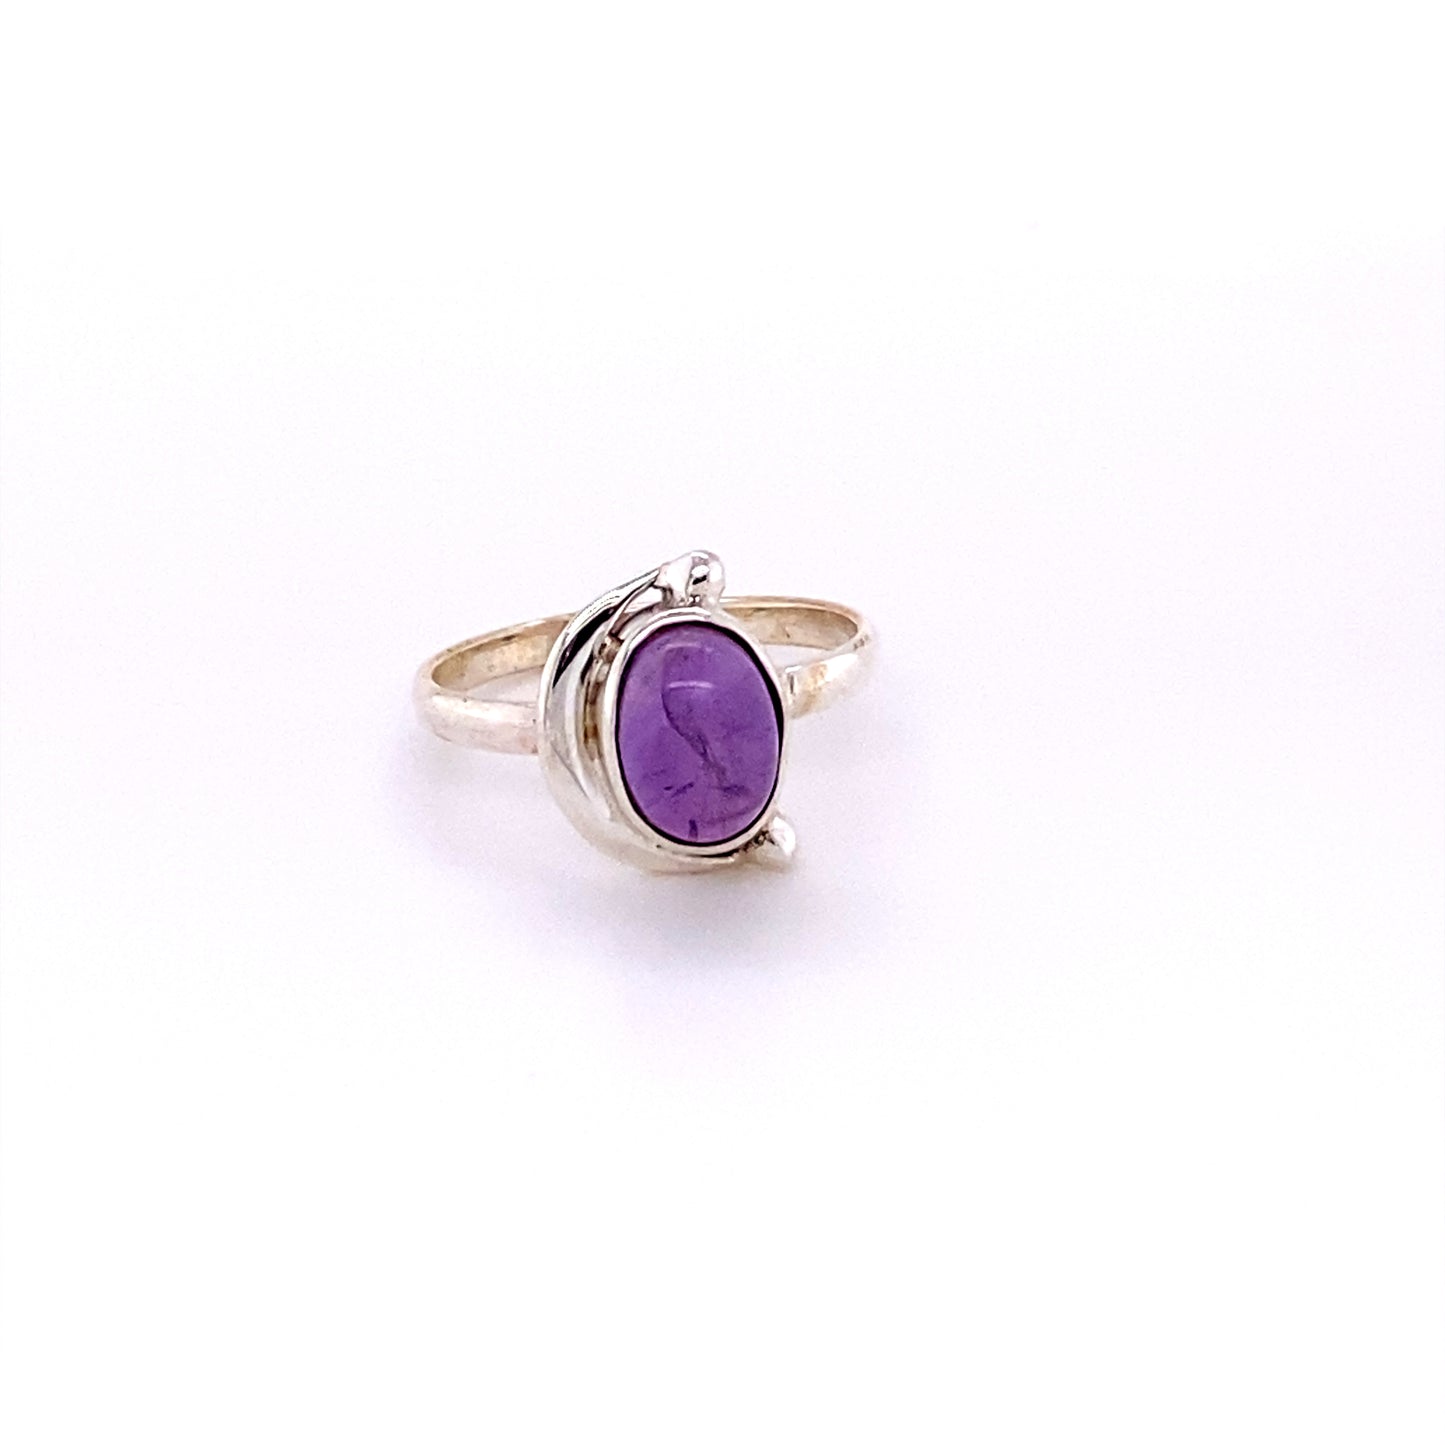 An Oval Crescent Moon Ring with Natural Gemstones on a white background.